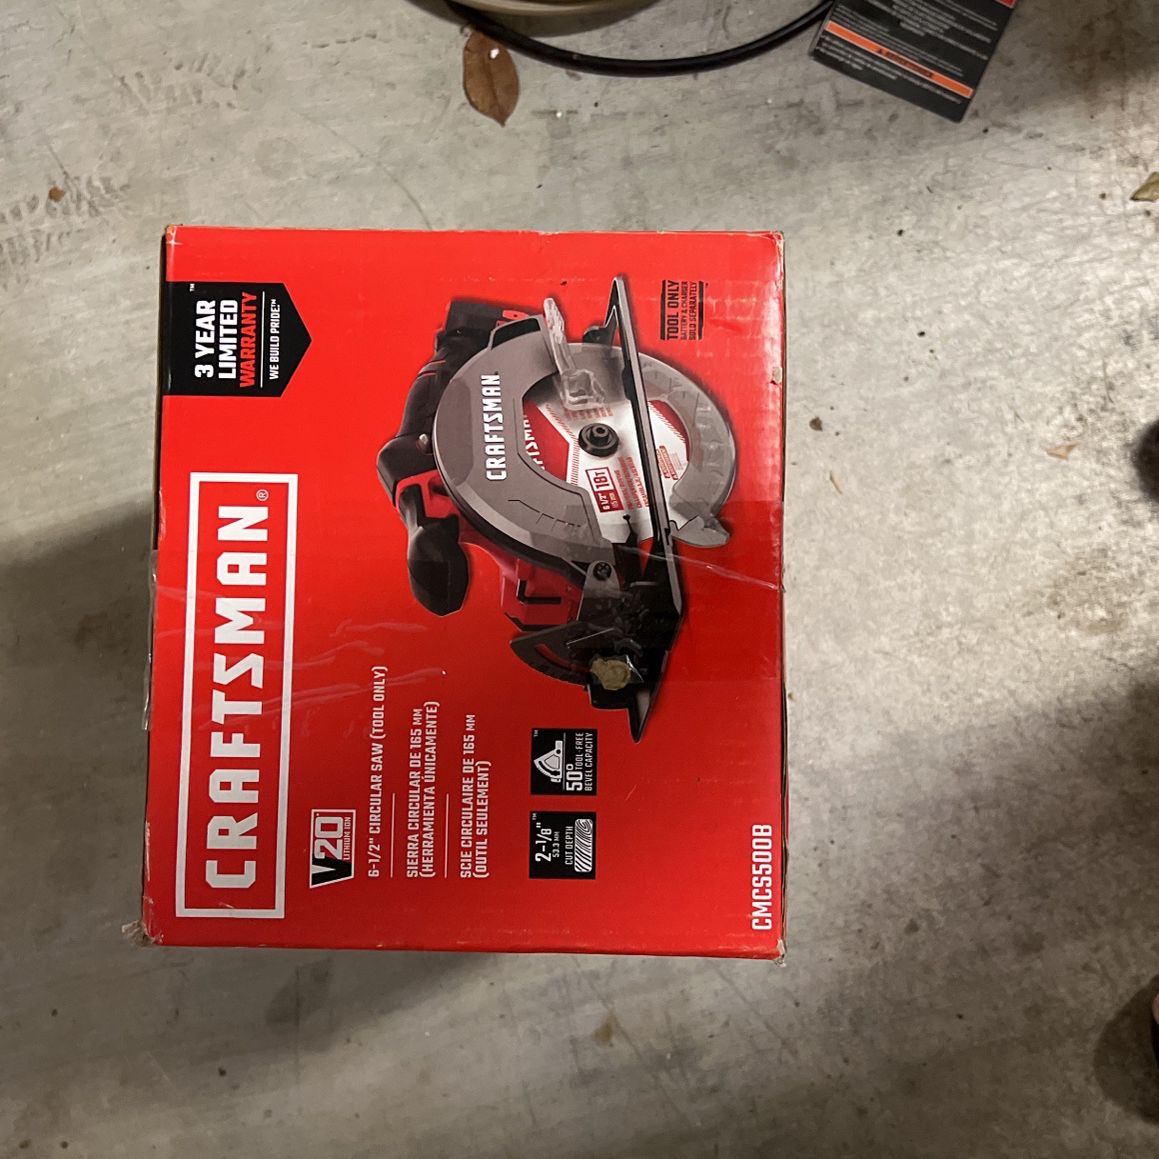 Craftsman Circular Saw for Sale in Houston, TX OfferUp